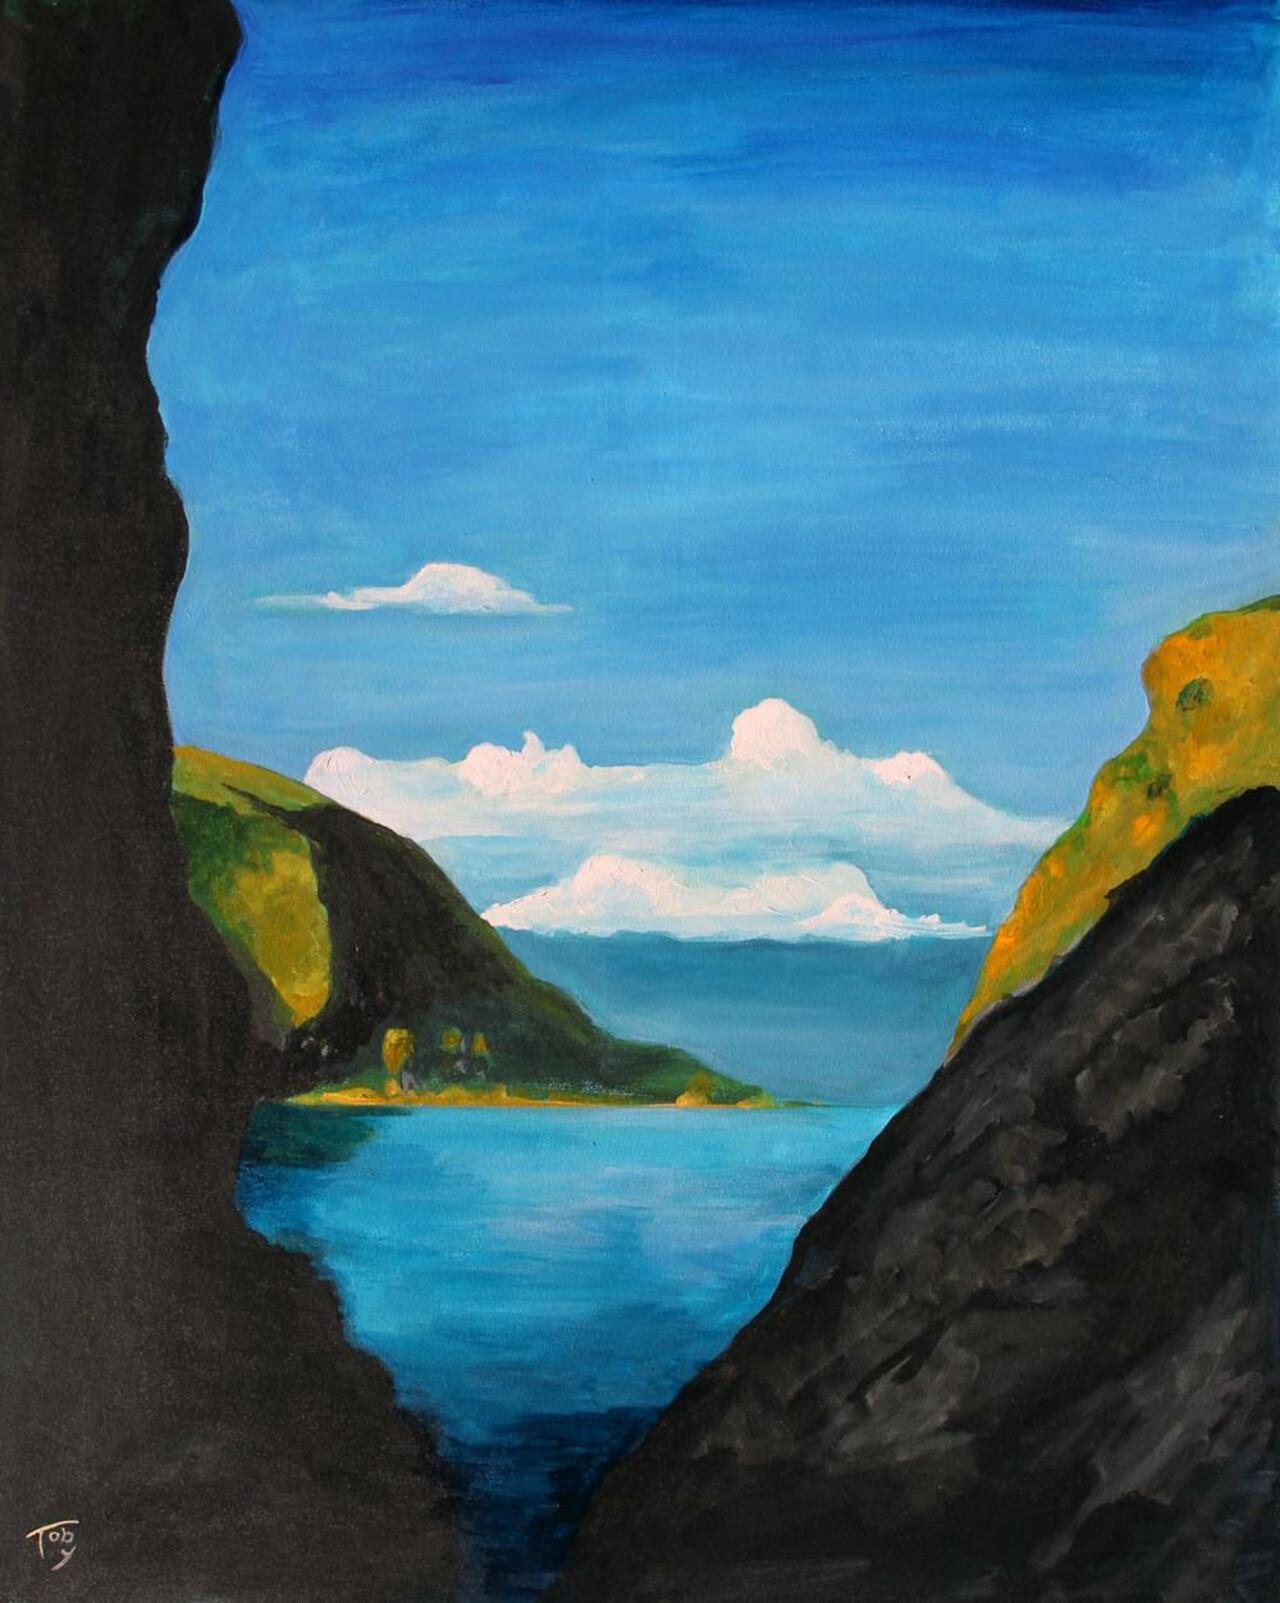 Polstreath by @Art_2oby #Cornwall #painting #art http://www.2oby.com http://facebook.com/2obyArt http://t.co/ahHpMvX6w6